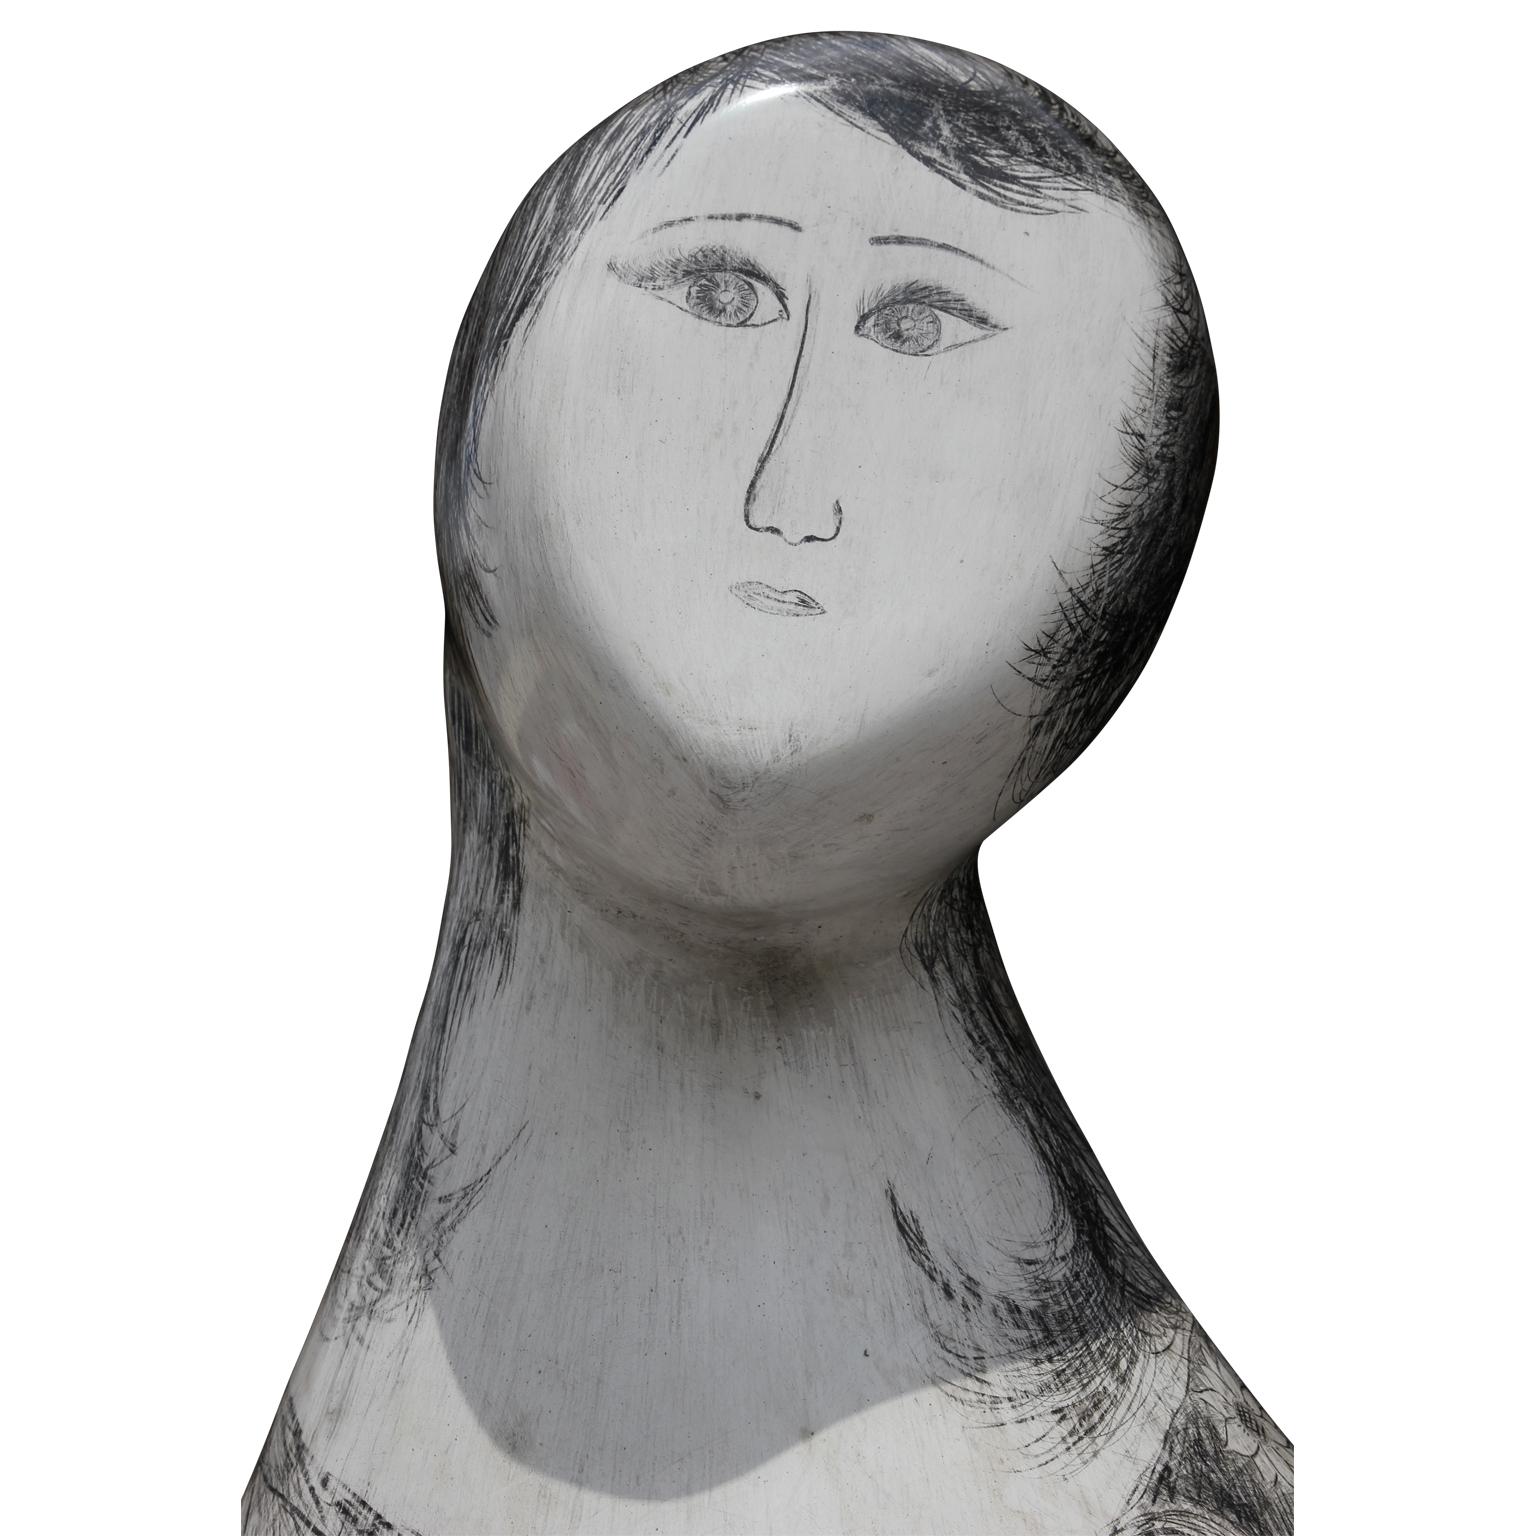 Large monumental size Gaia Mother Earth sculpture made out of clay and drawn on using charcoal. The piece is in the style of Modigliani's figurative portraits. 